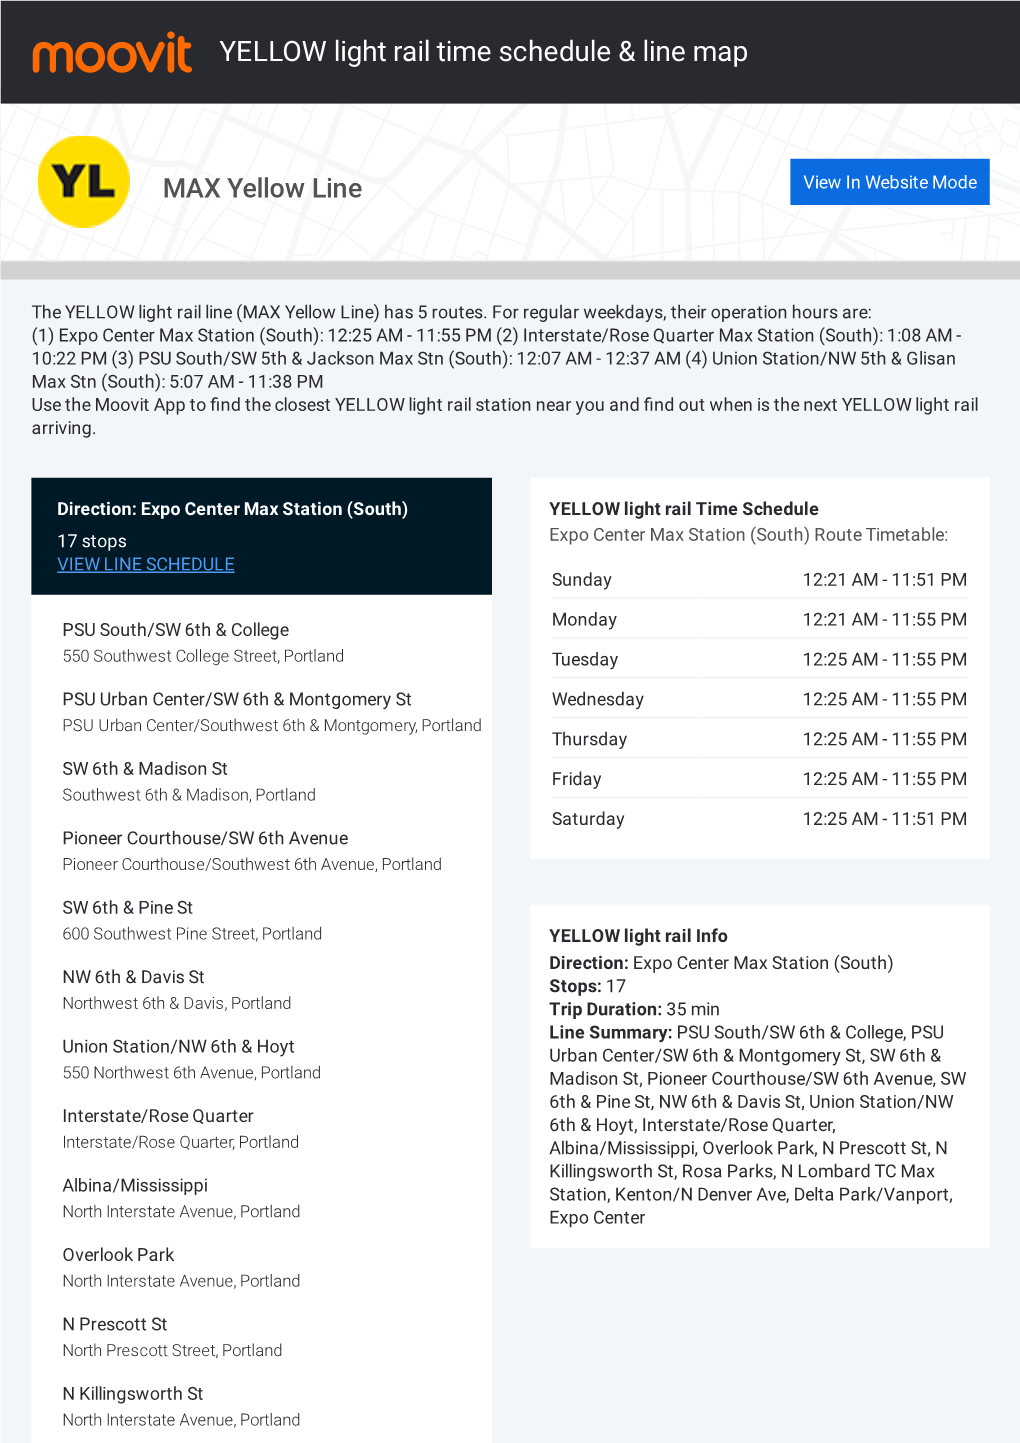 YELLOW Light Rail Time Schedule & Line Route